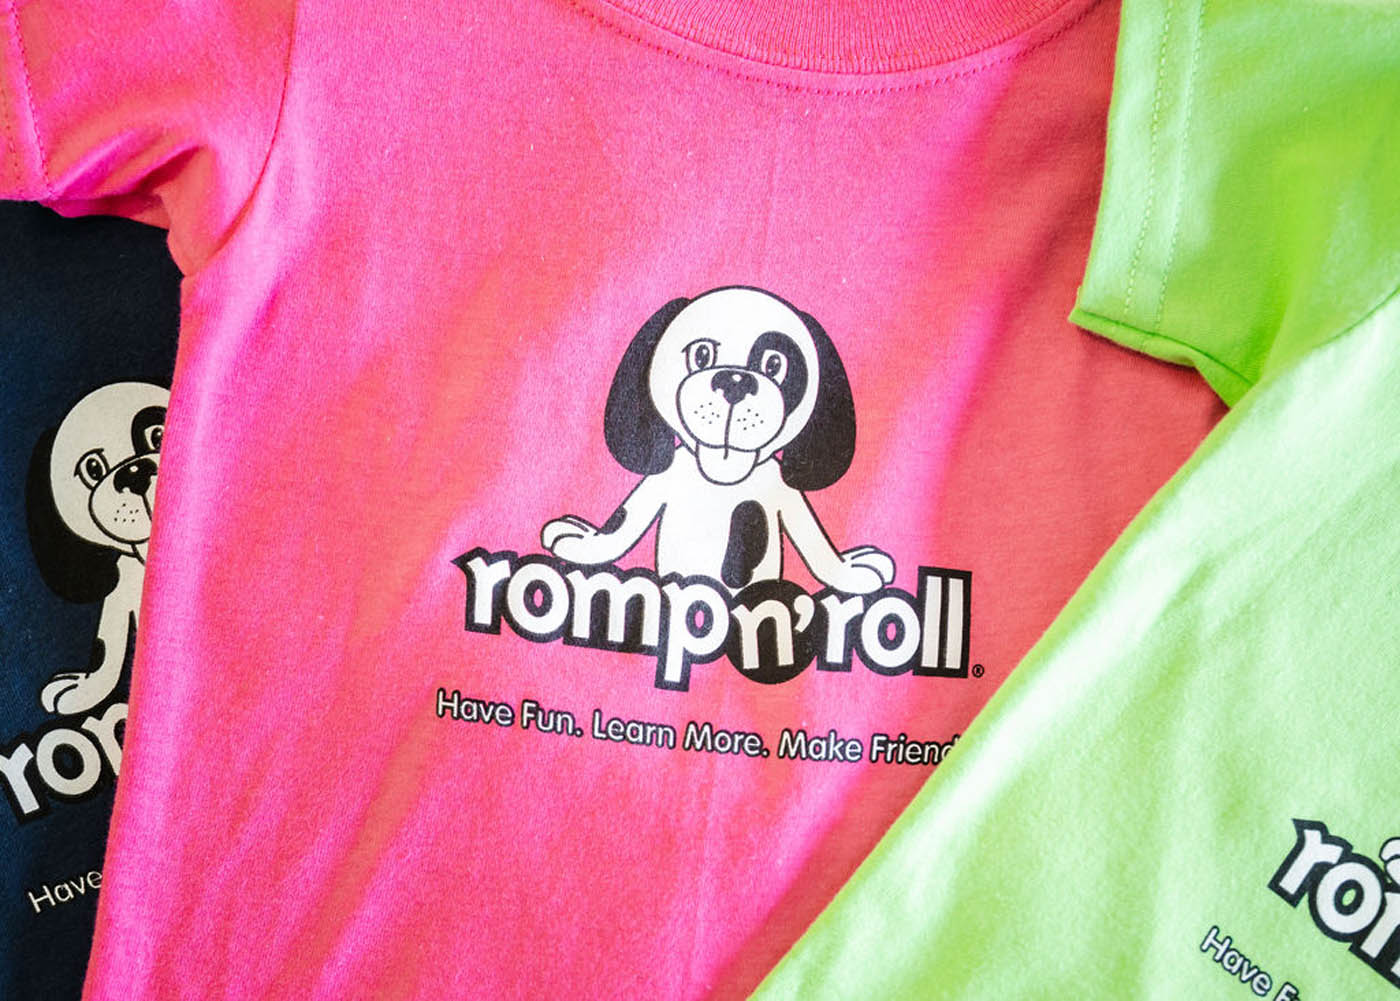 A pink t-shirt with Rompy and the Romp n' Roll logo on the front.